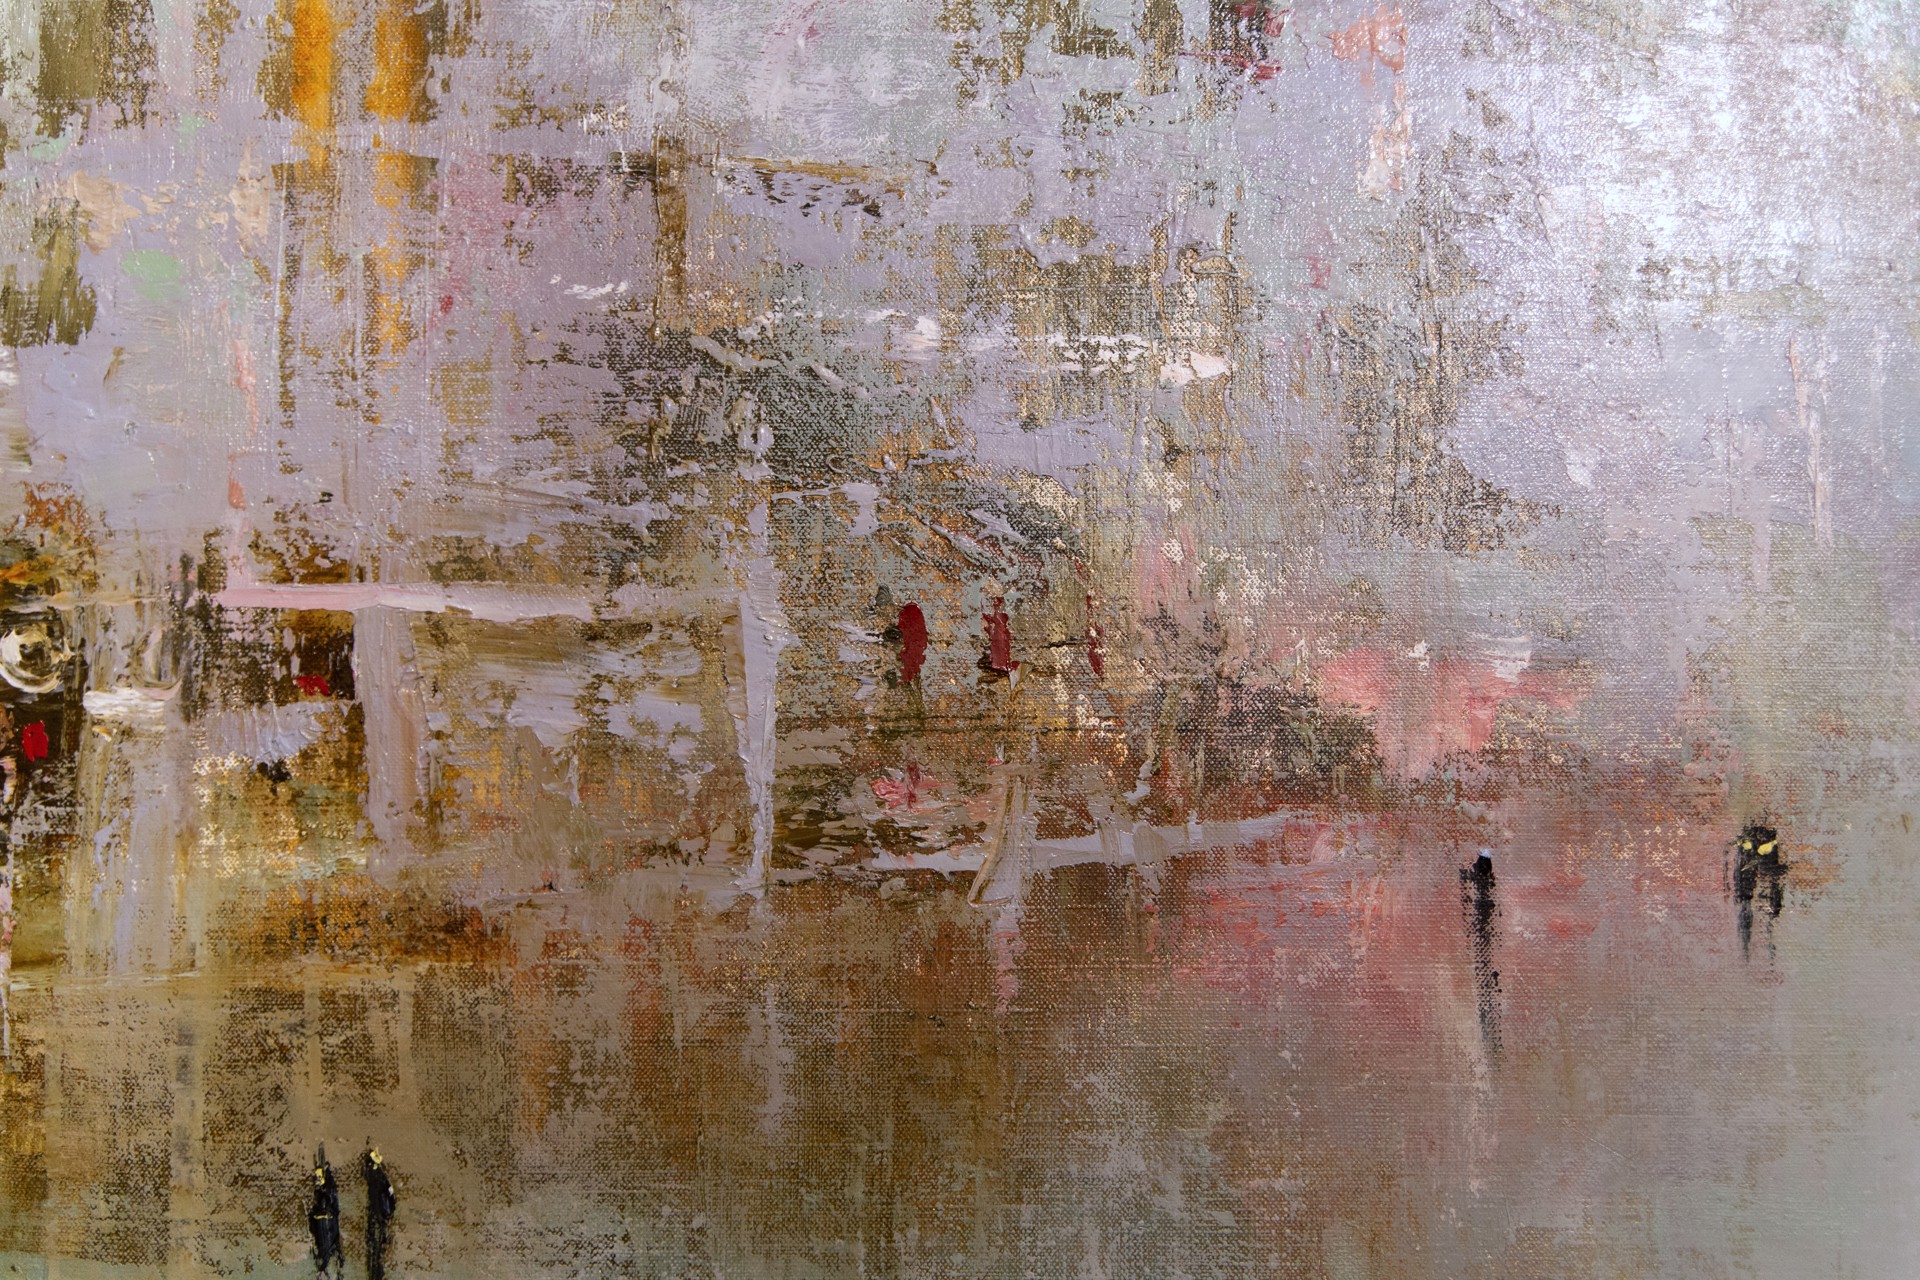 The soul has moments of escape by France Jodoin